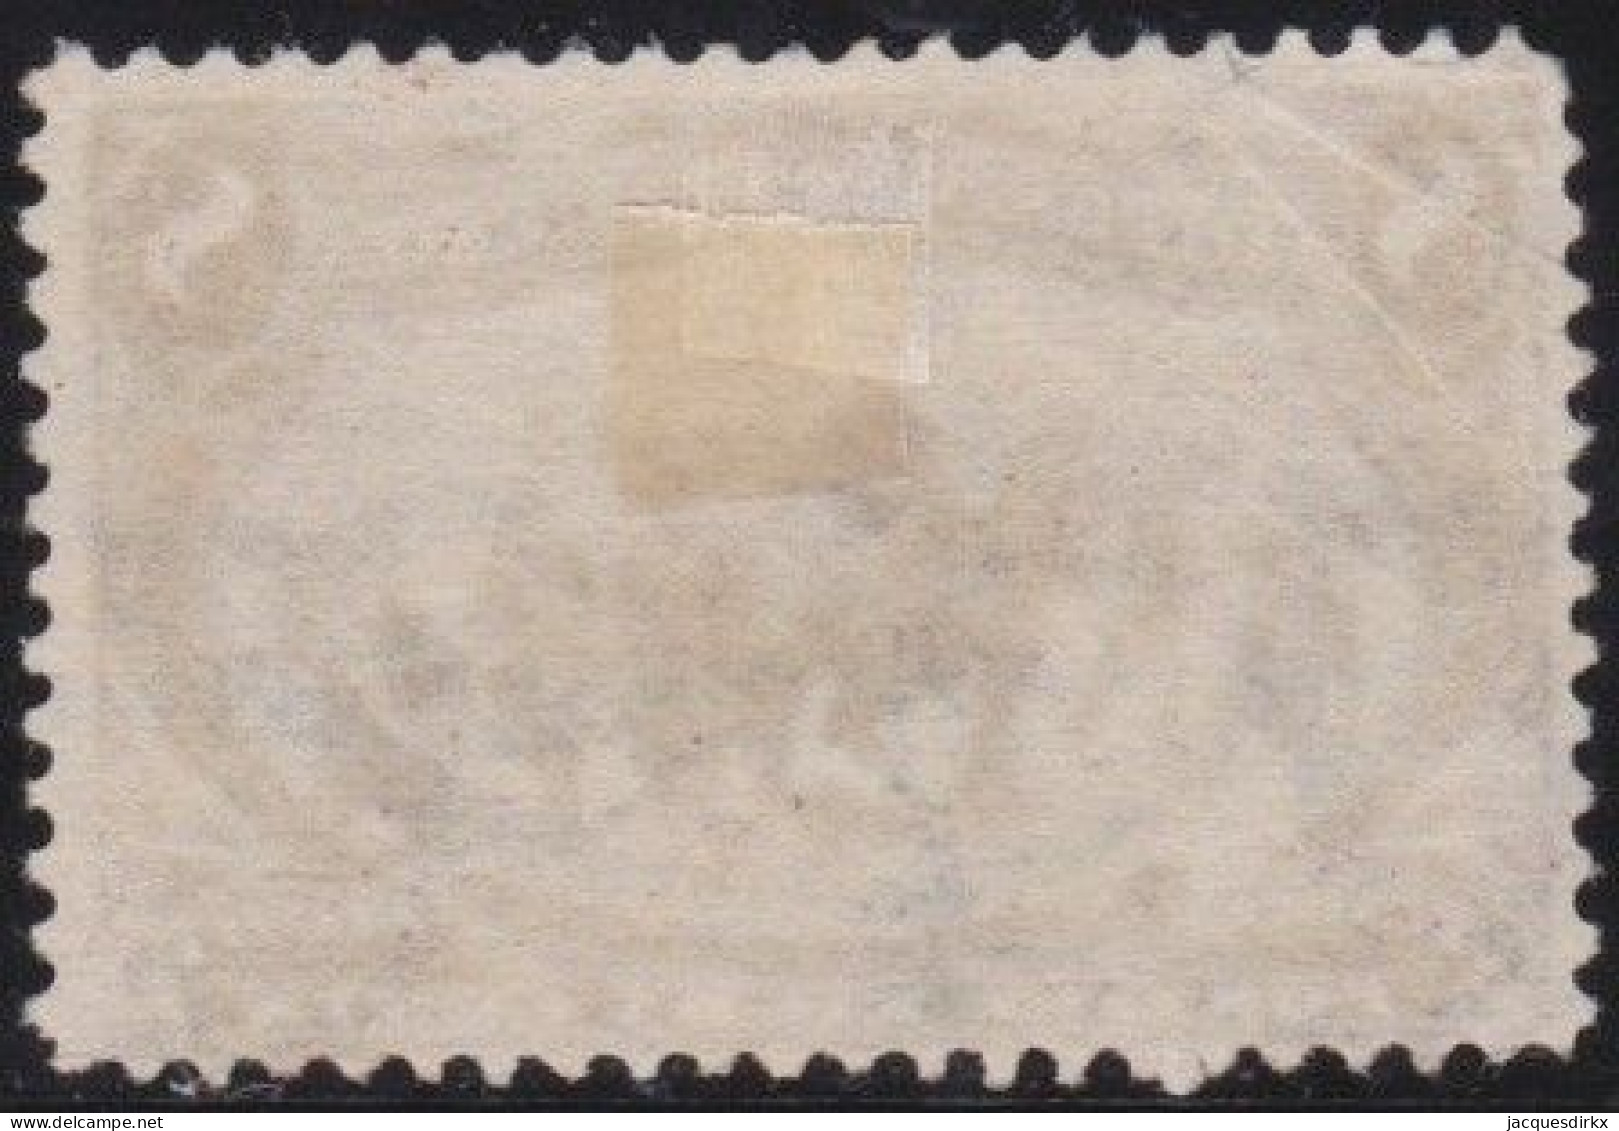 USA    .    Yvert    .    133 (2 Scans)  .    O     .    Cancelled - Used Stamps